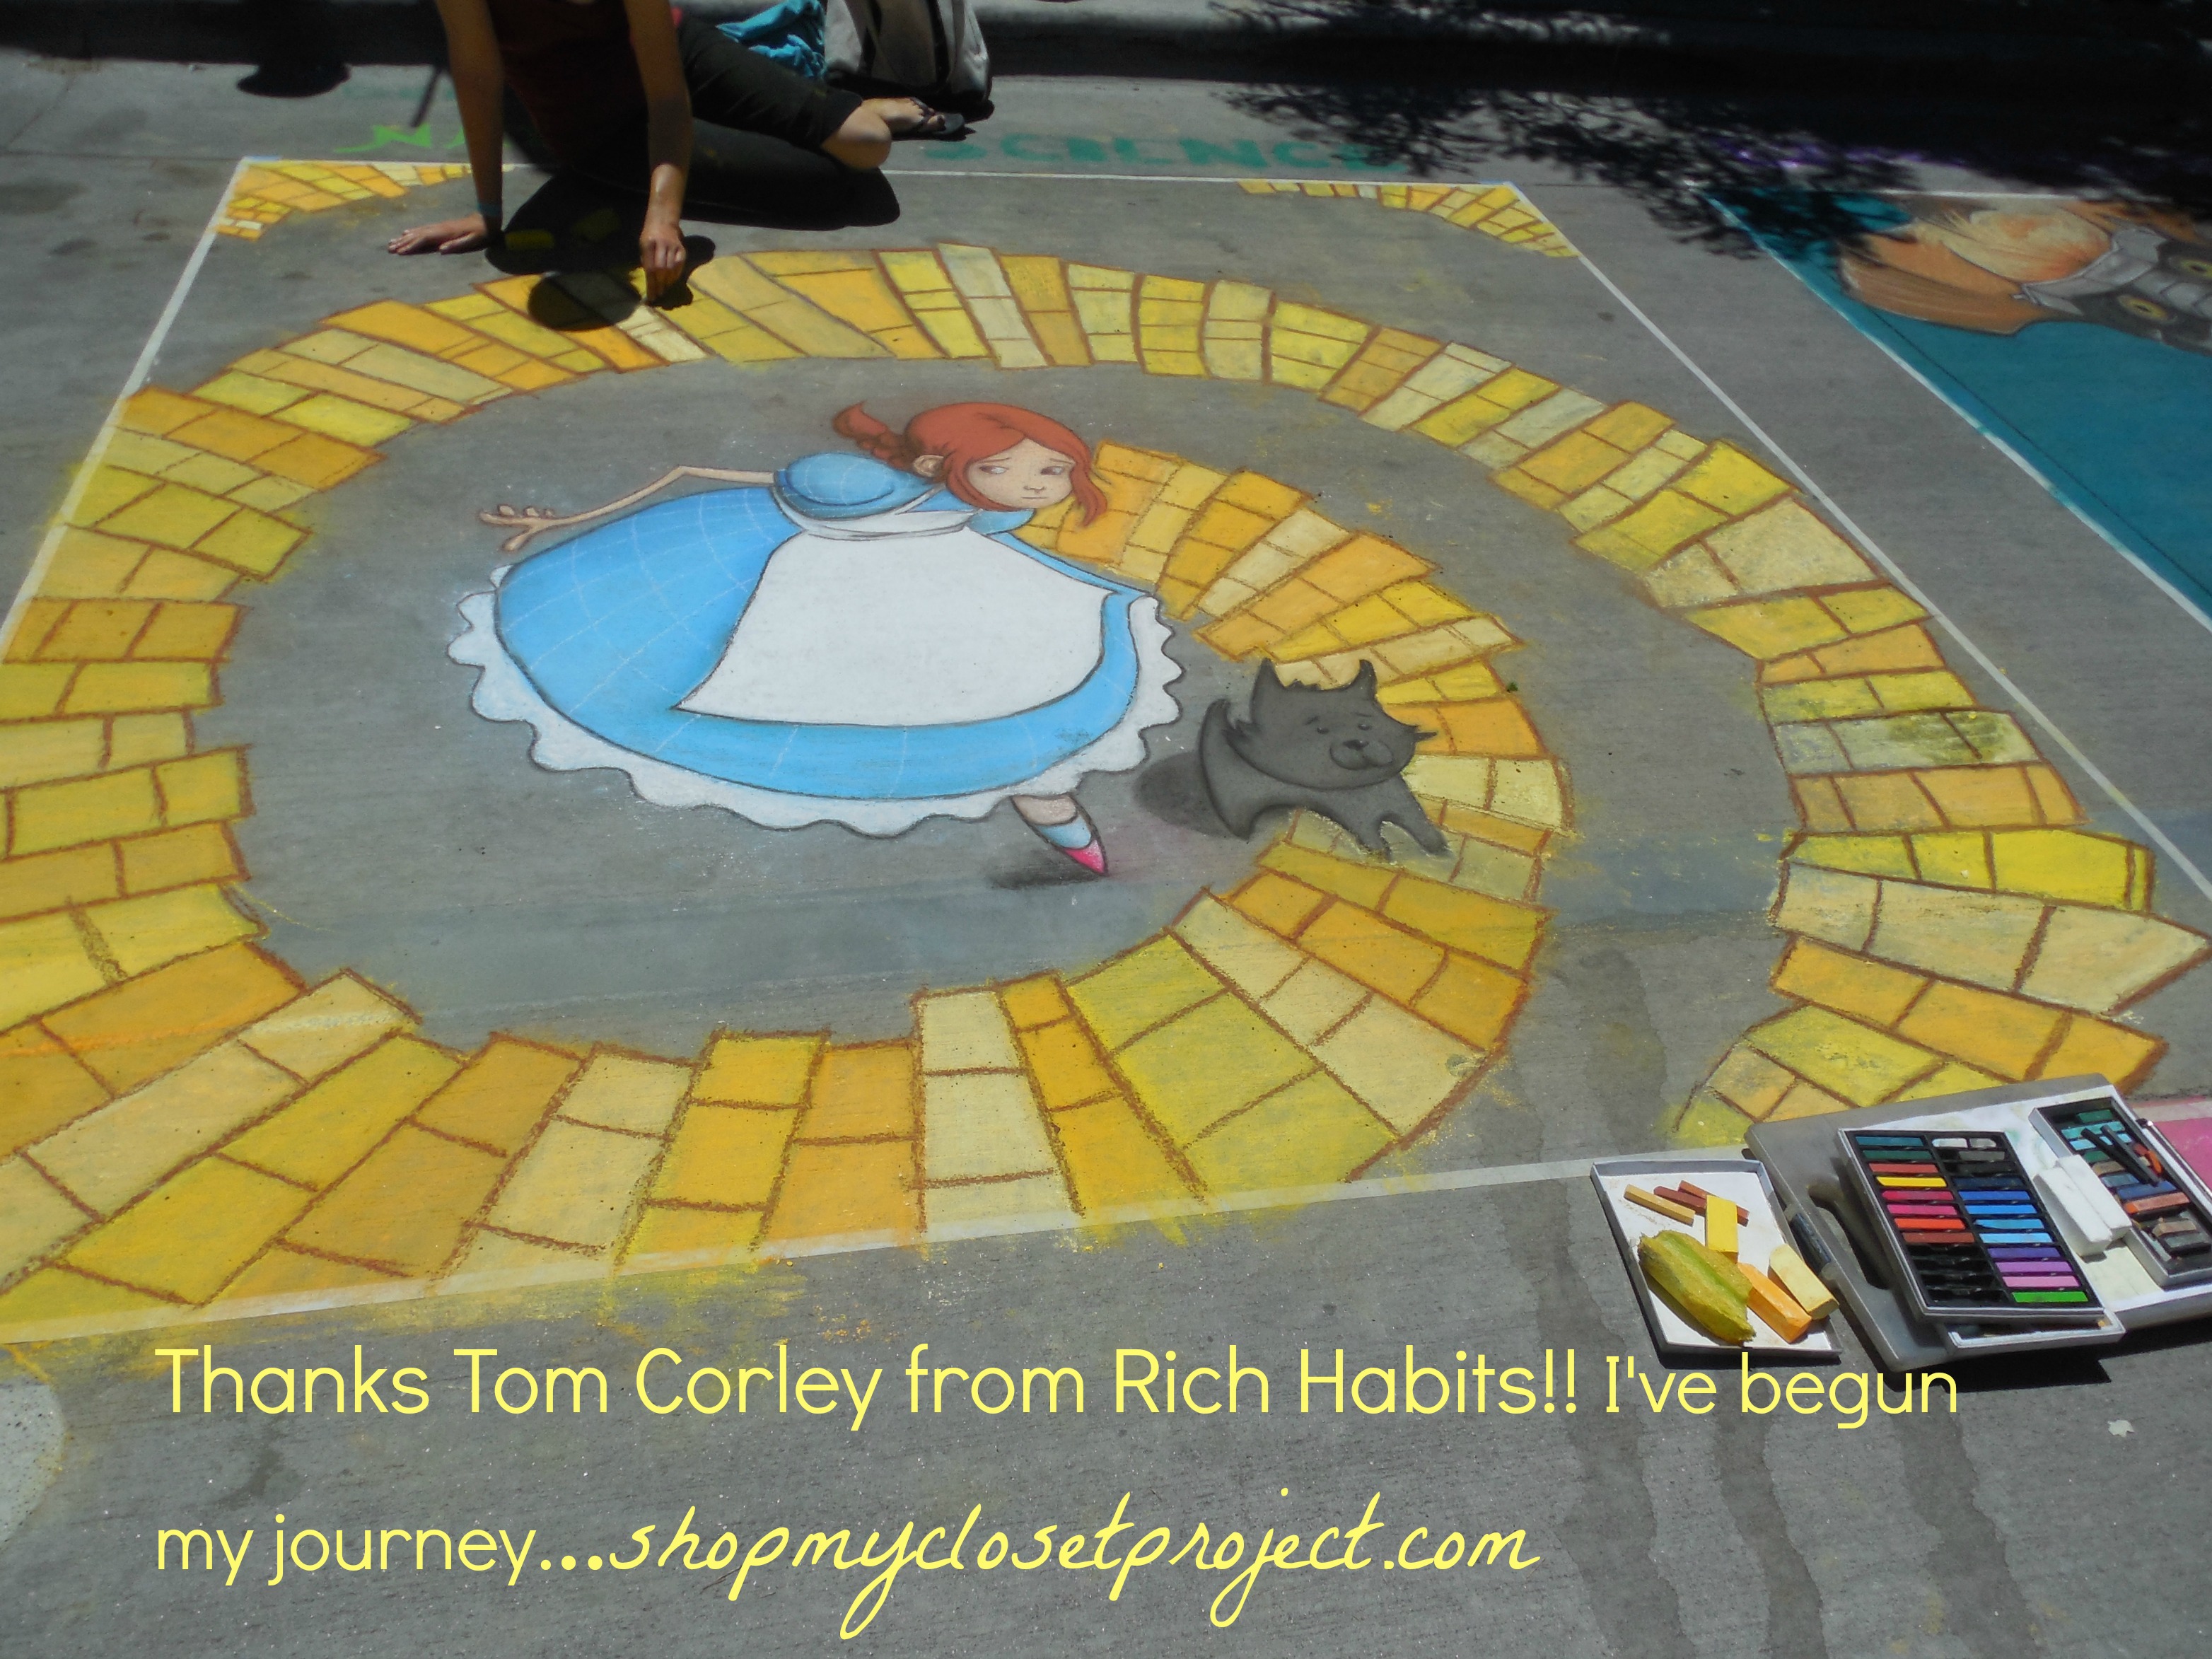 A Thank You Letter To Tom Corley of Rich Habits